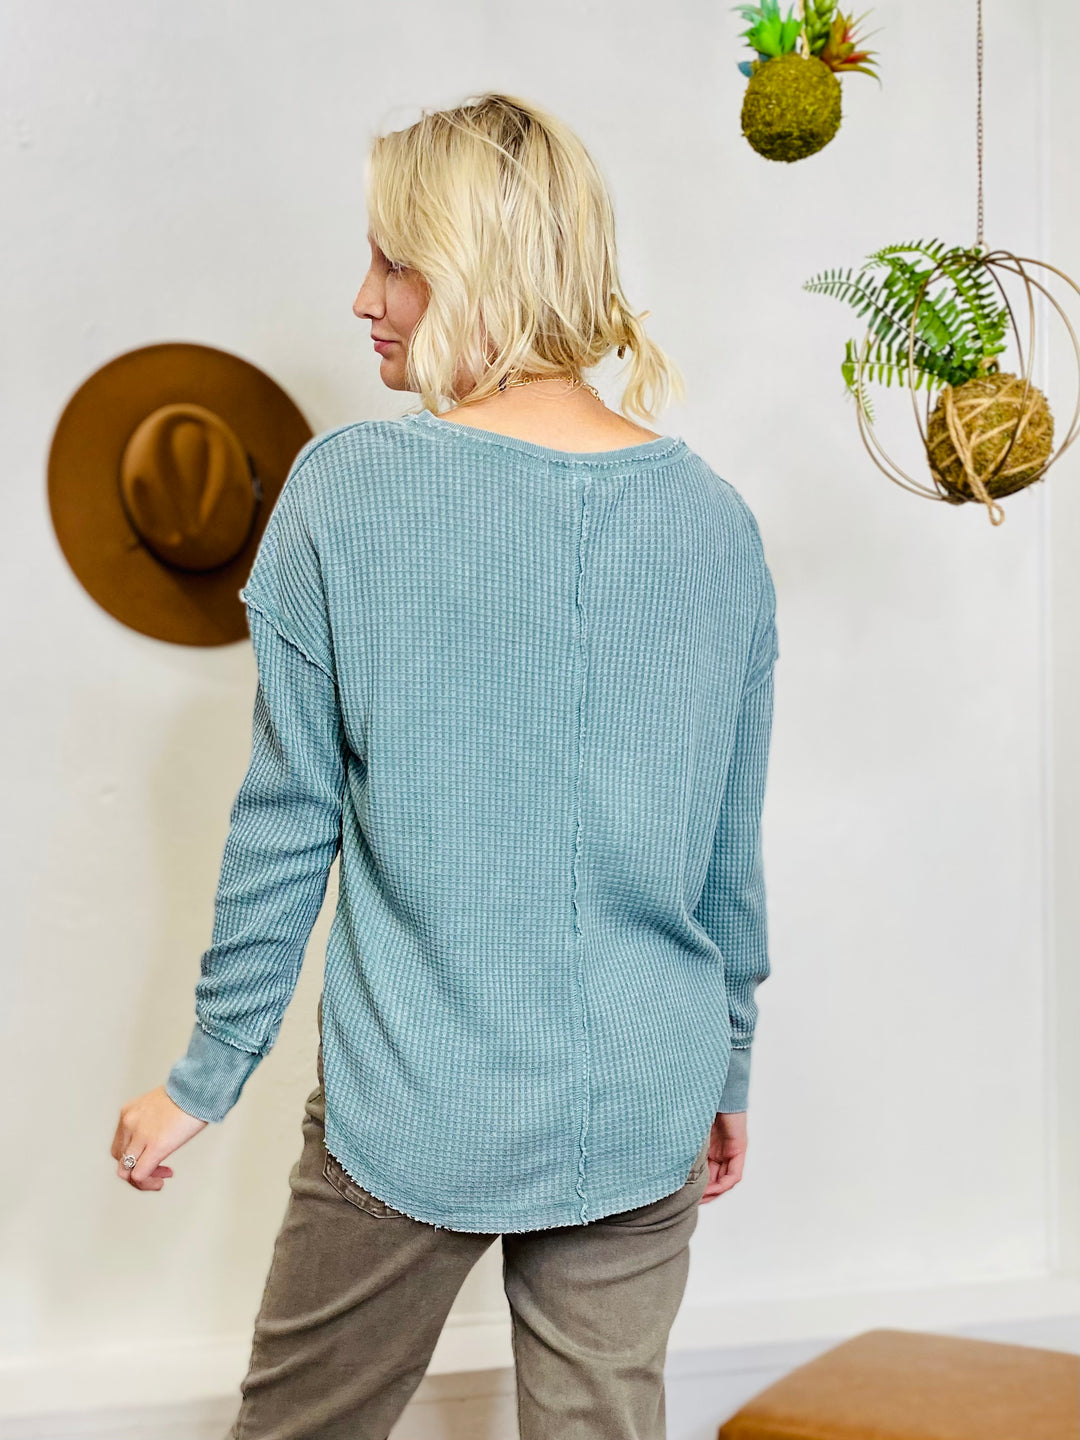 Driftwood Thermal Long Sleeve Top Z SUPPLY-Tops-Anatomy Clothing Boutique in Brenham, Texas